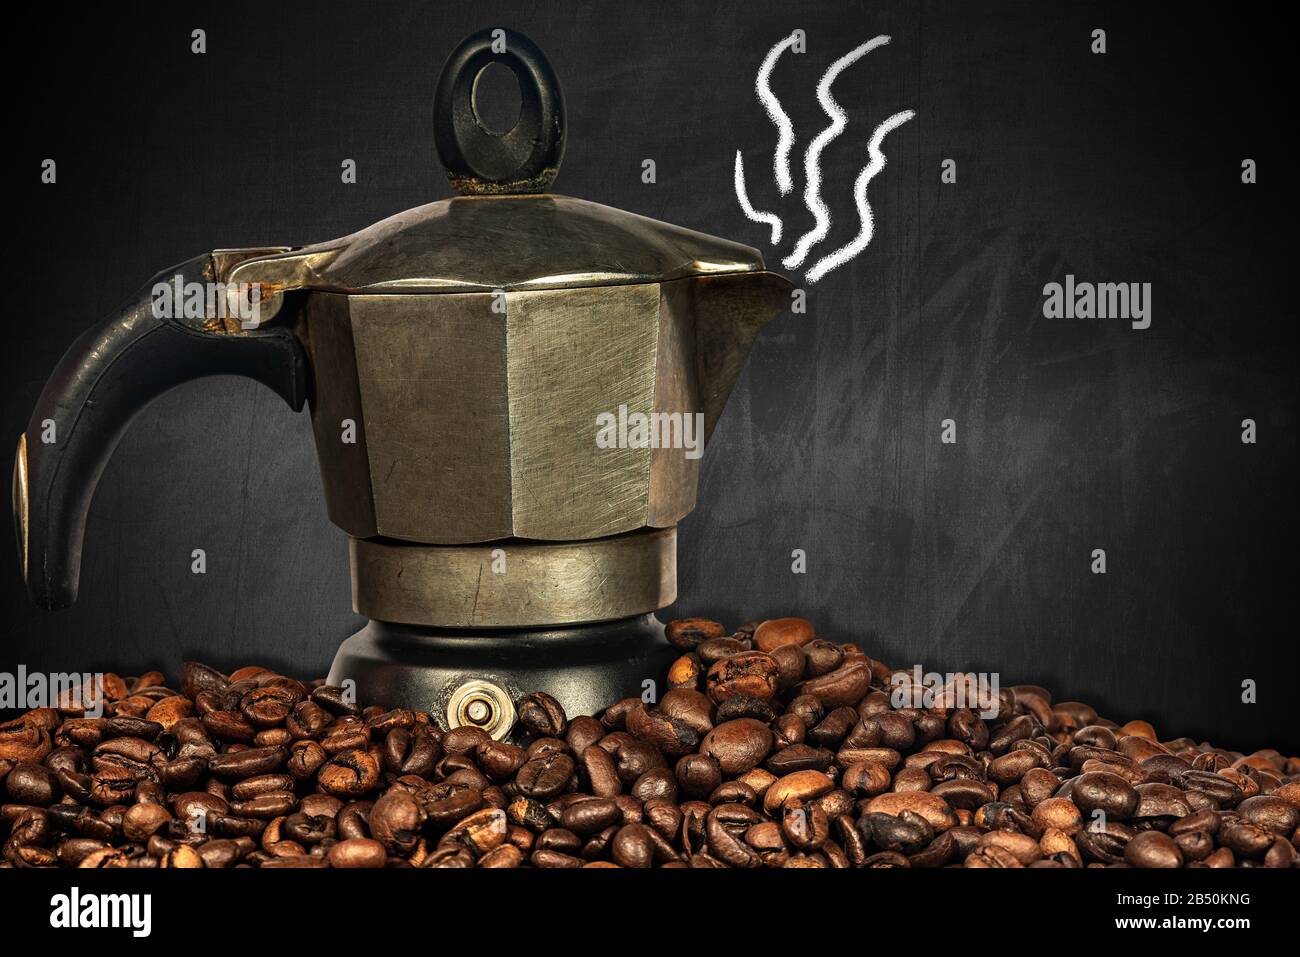 Italian Coffee Maker On Rustic Kitchen With Unfocused Background